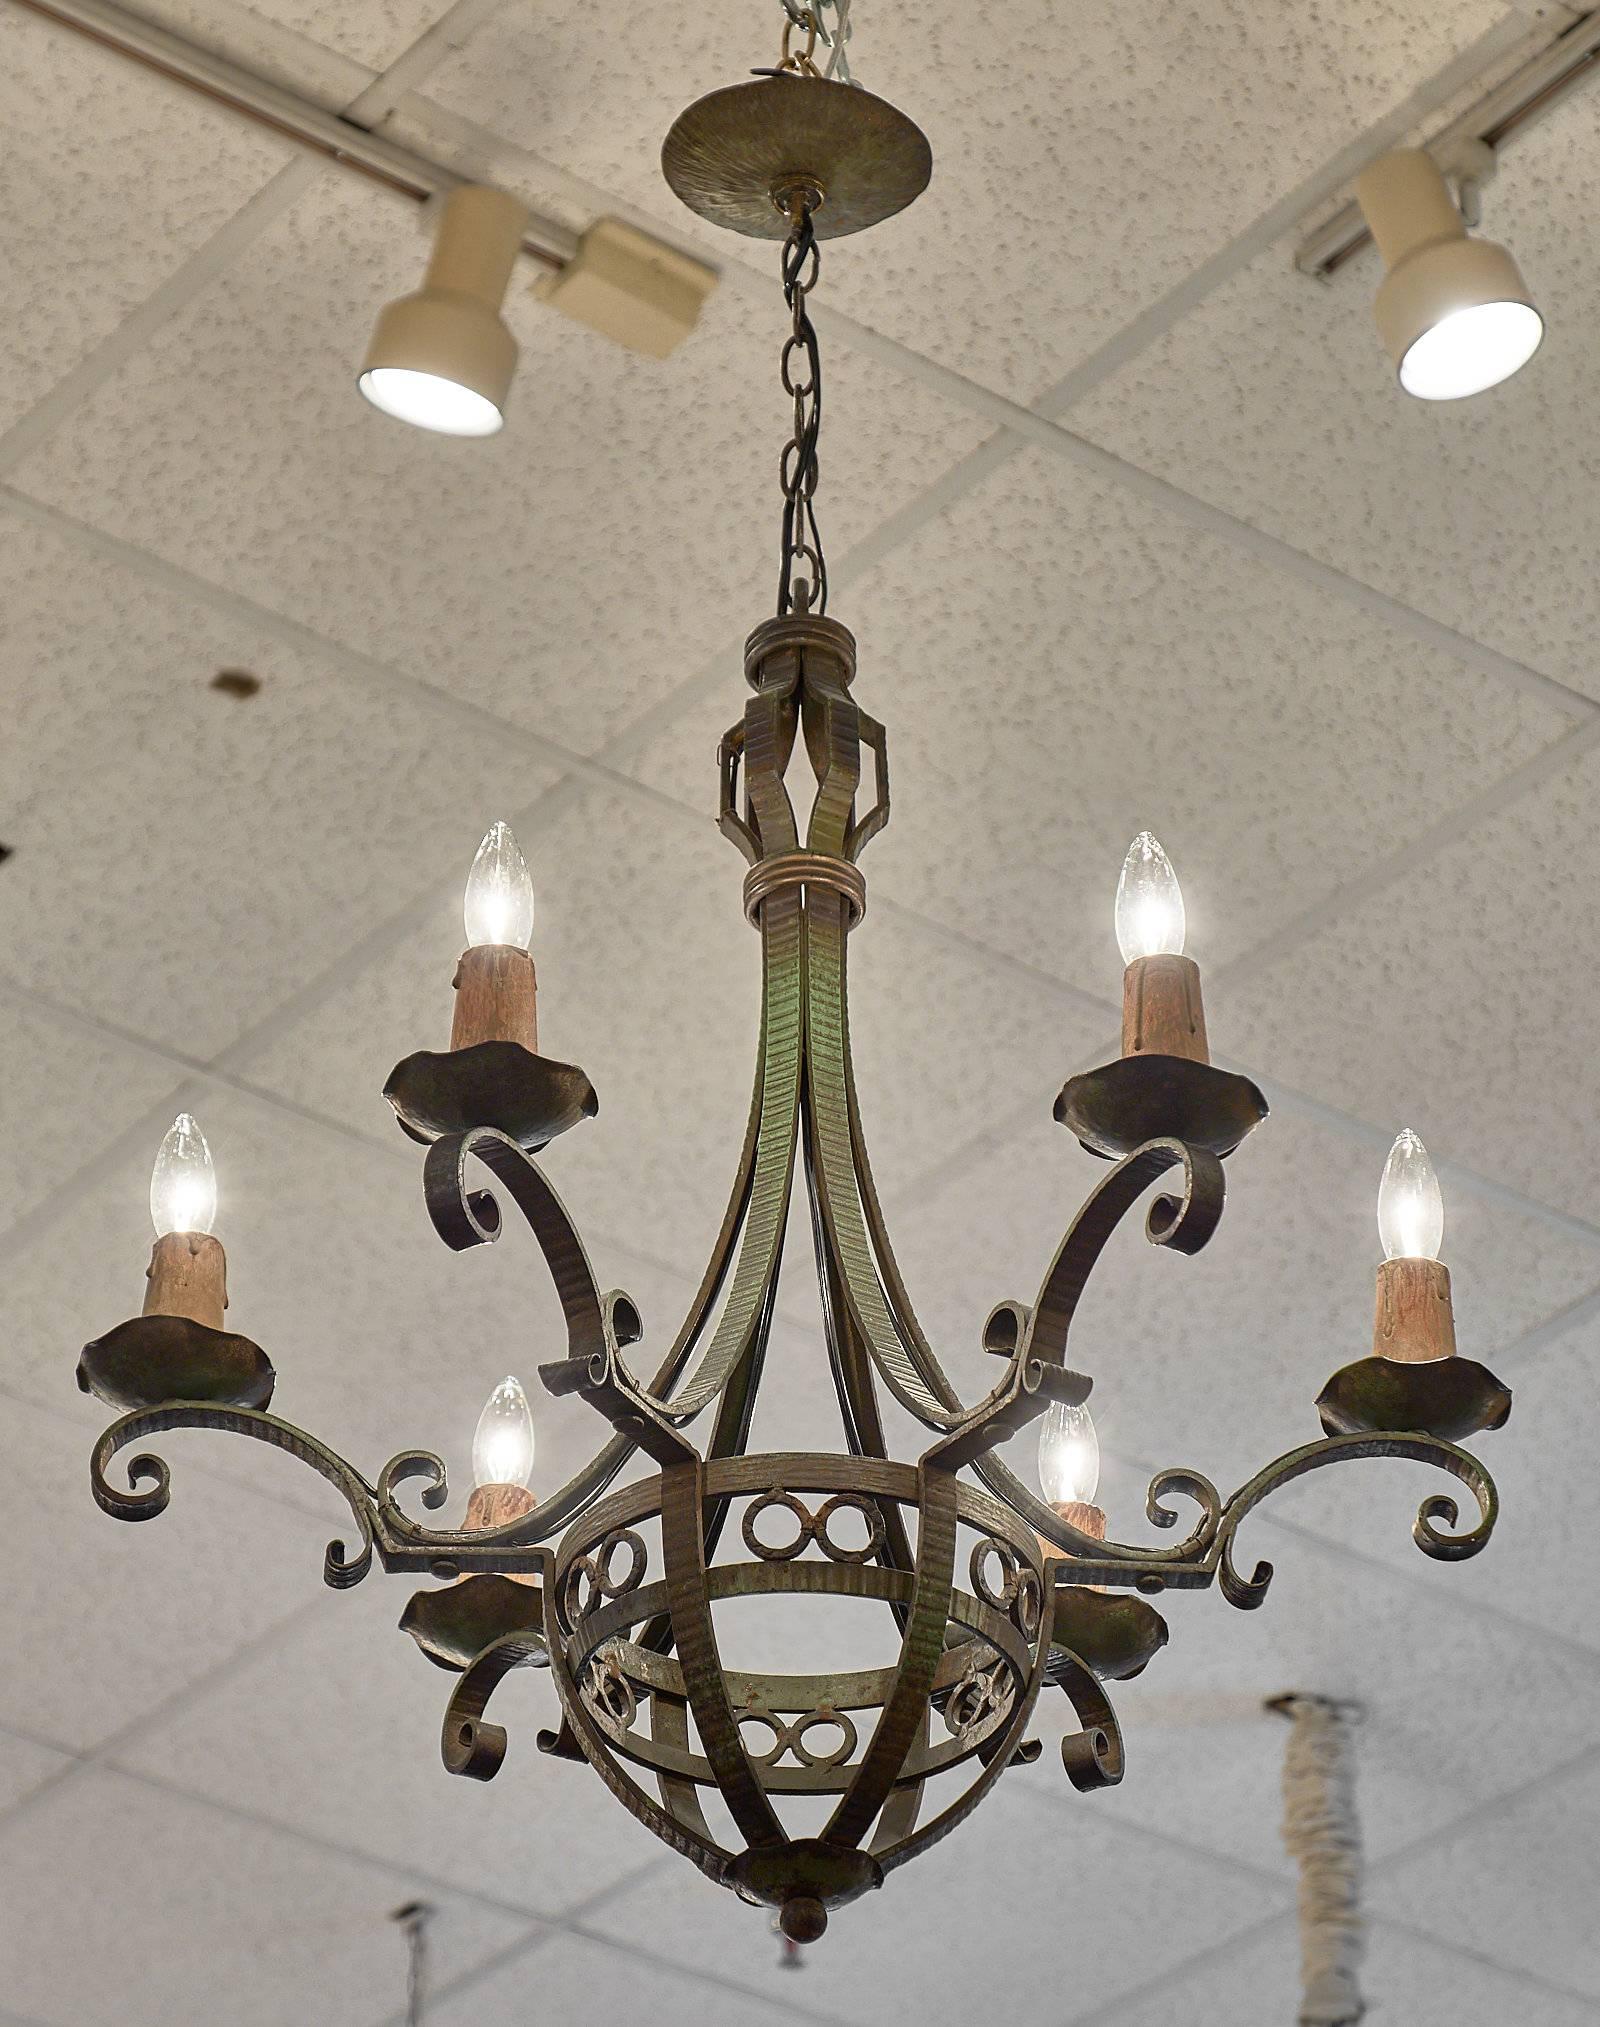 Art Deco period forged iron chandelier with six arms. This traditional piece has a green tone to the metal, and a strong appeal with curved elements holding the bobeches . This fixture has been wired to fit US standards.